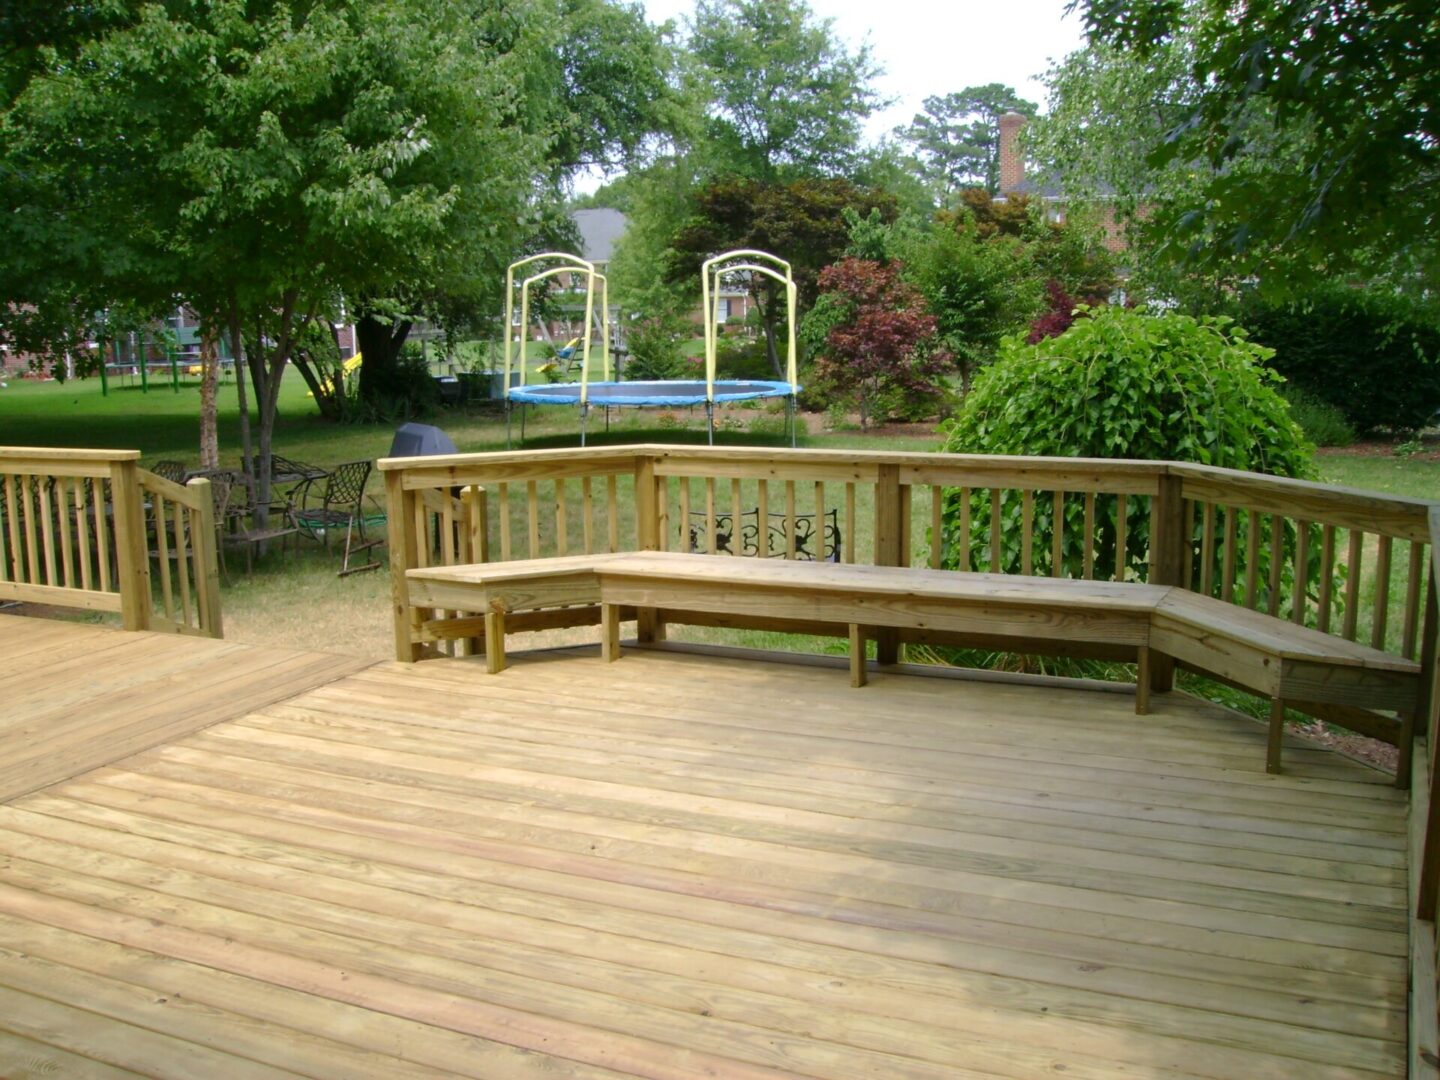 A wooden deck with benches and trees in the background.